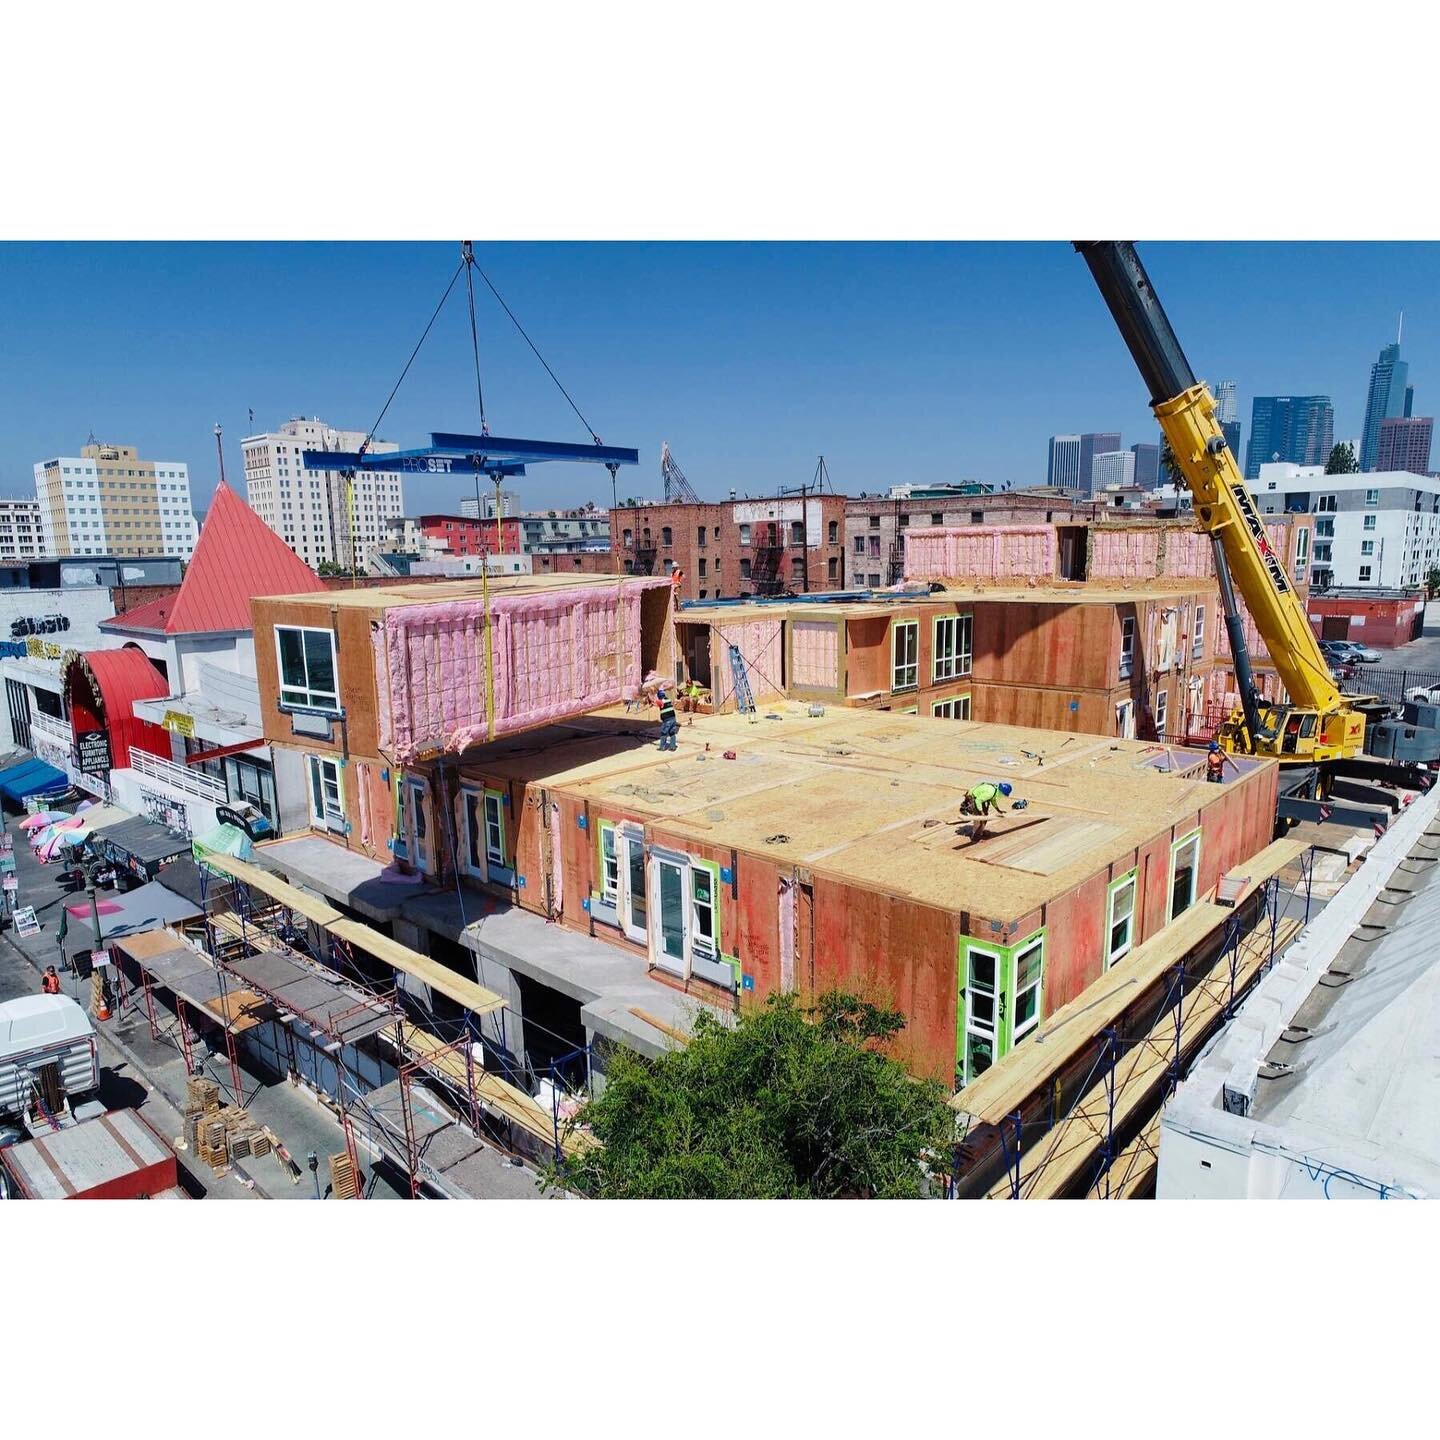 All six stories of prefabricated modular units have been set at Alvarado St. In only six days!